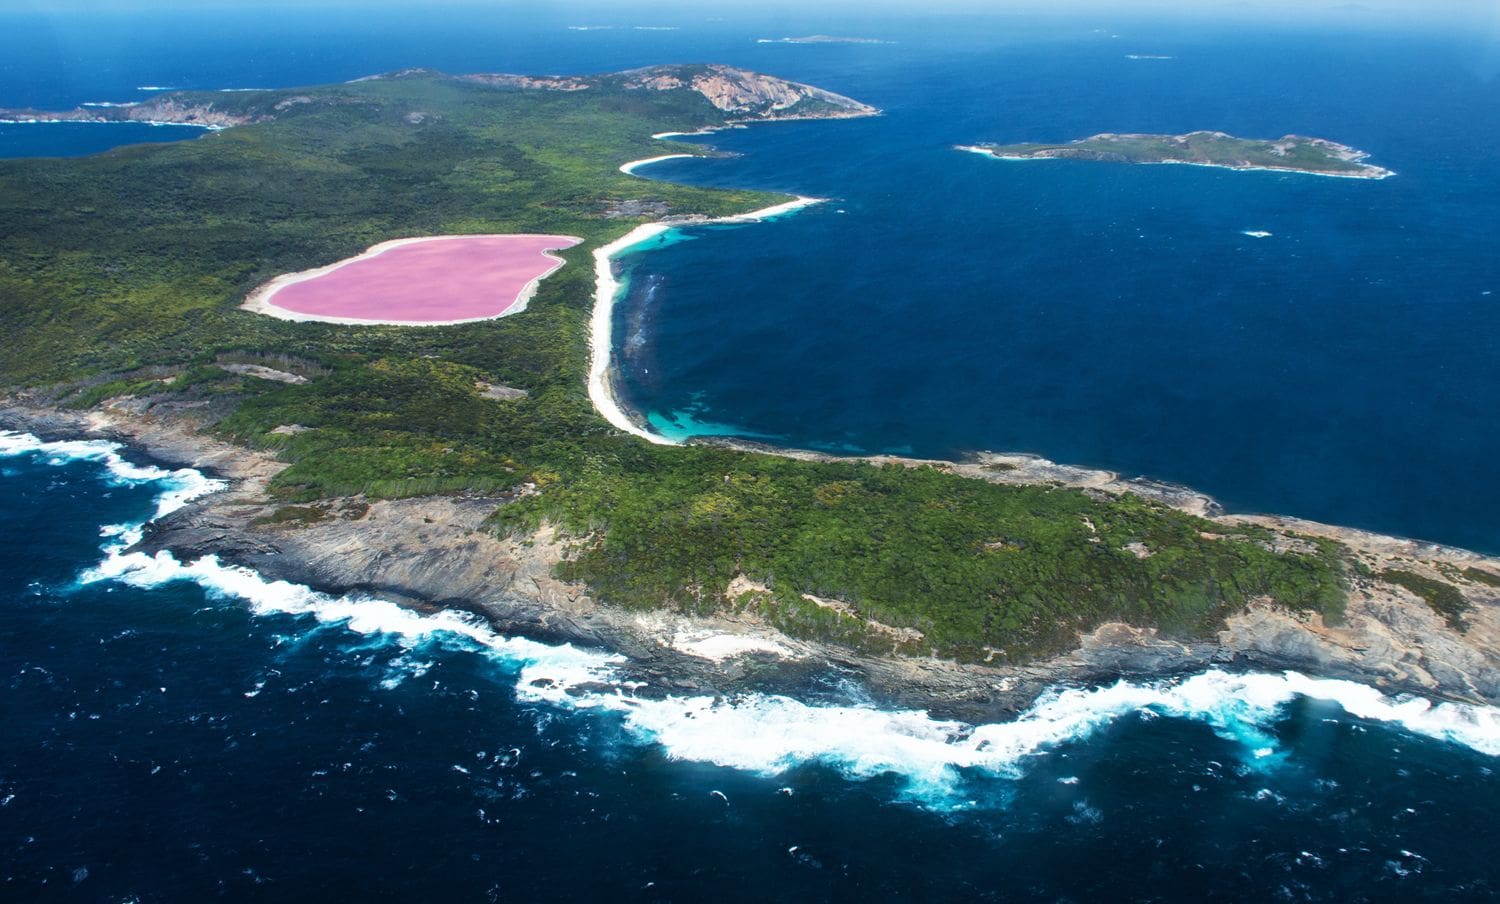 The Pink Lakes Of Australia - Why They're Pink and Where To Find Them